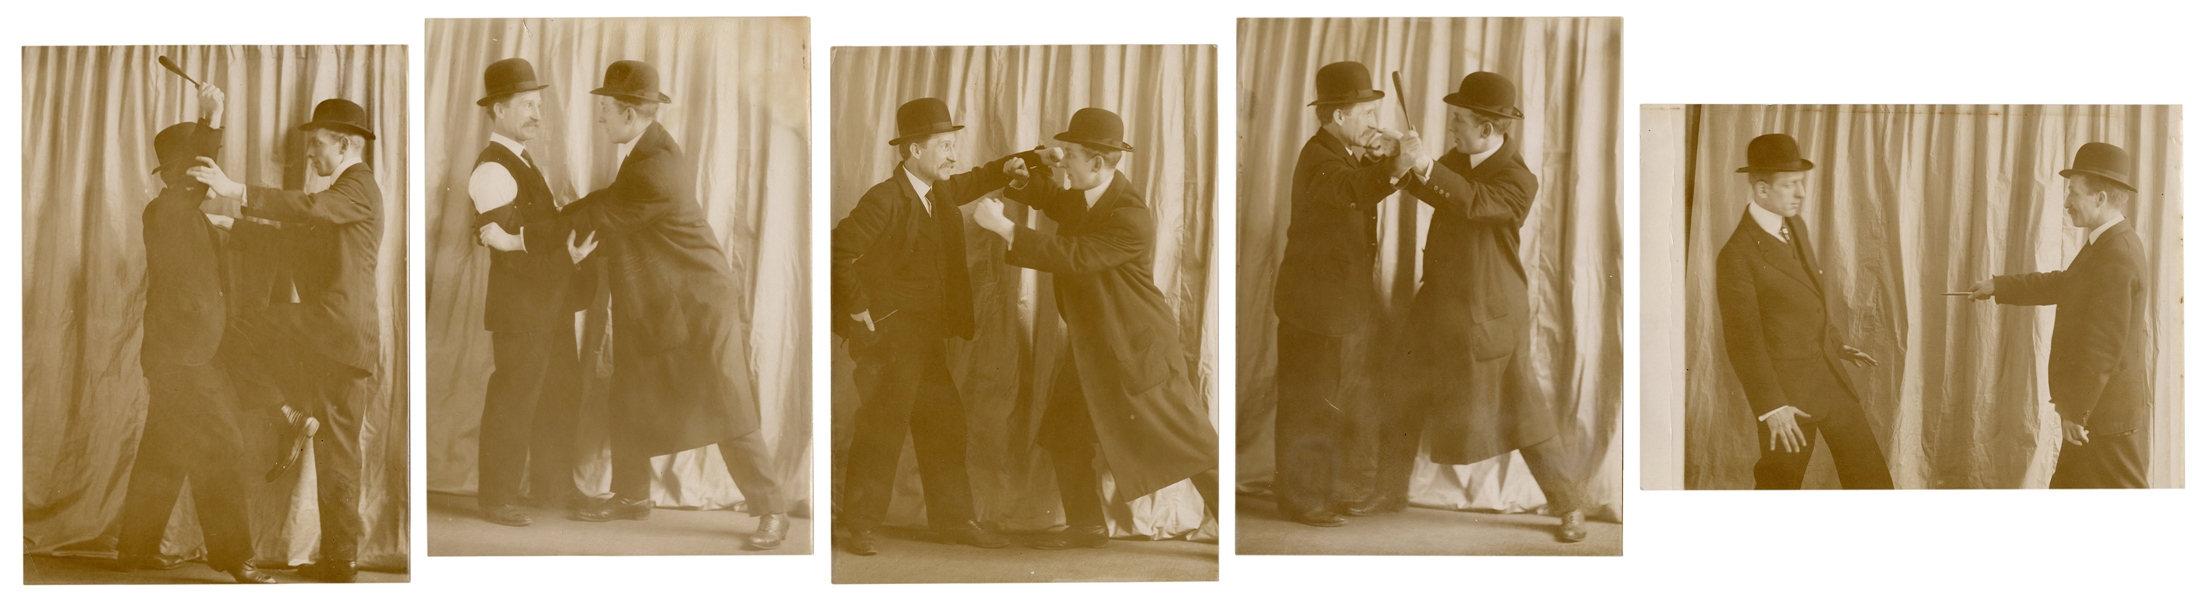  Early photographs of self-defense techniques. Early 20th ce...